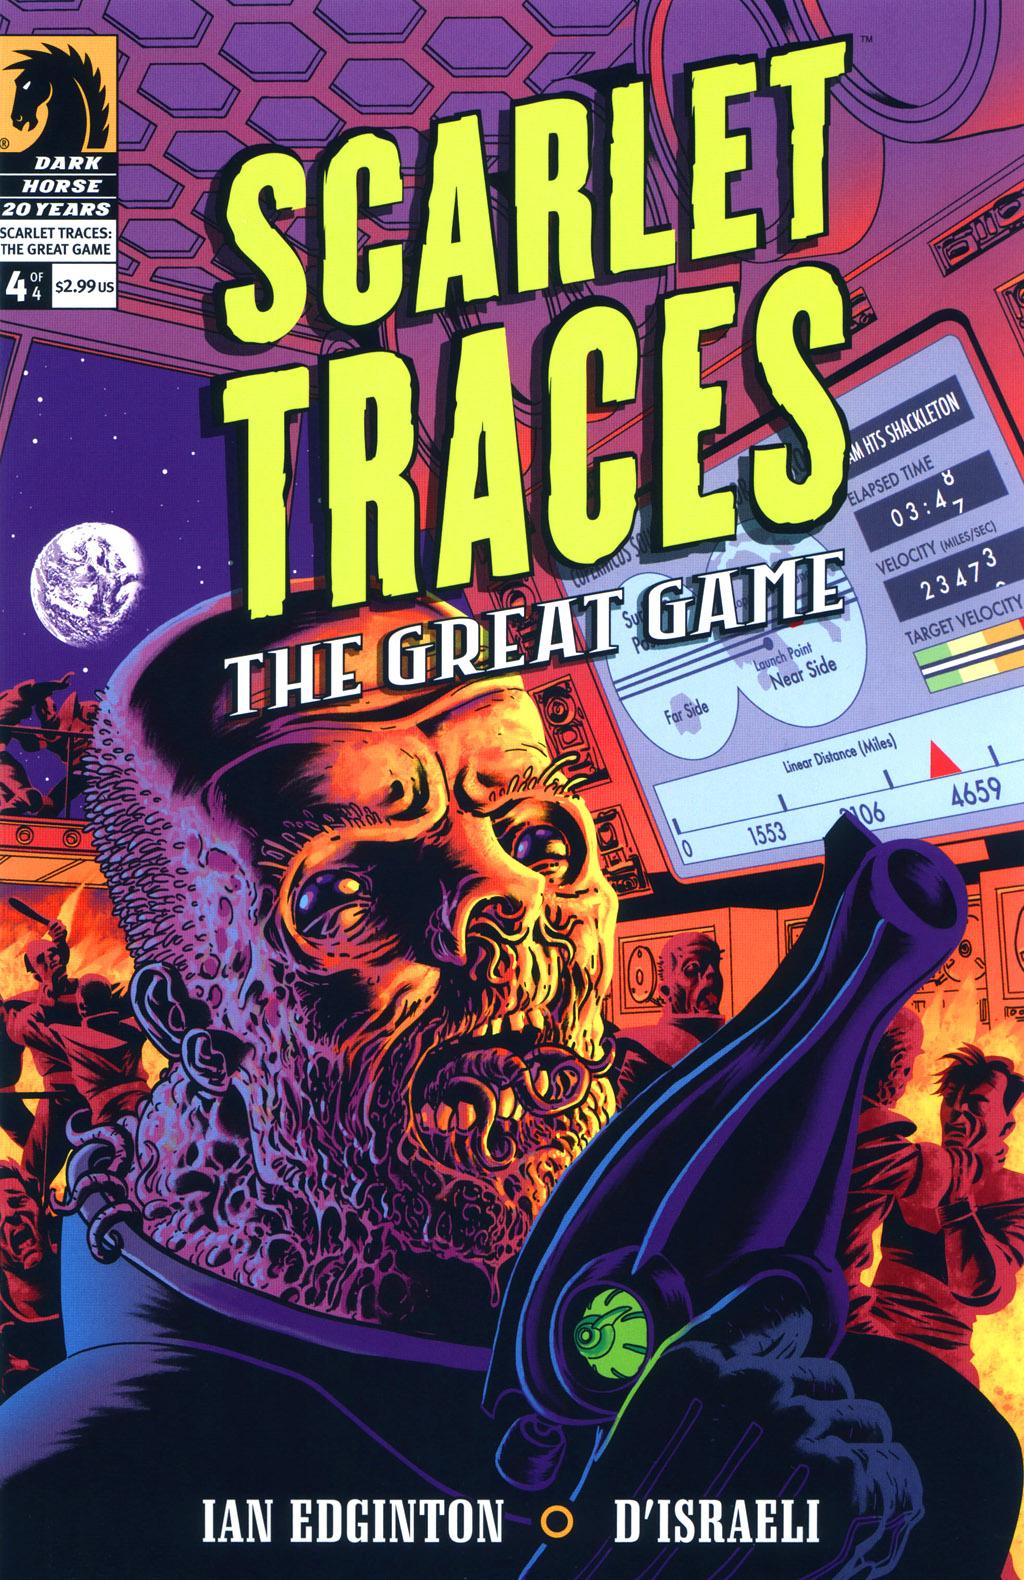 Scarlet Traces: The Great Game Vol. 1 #4